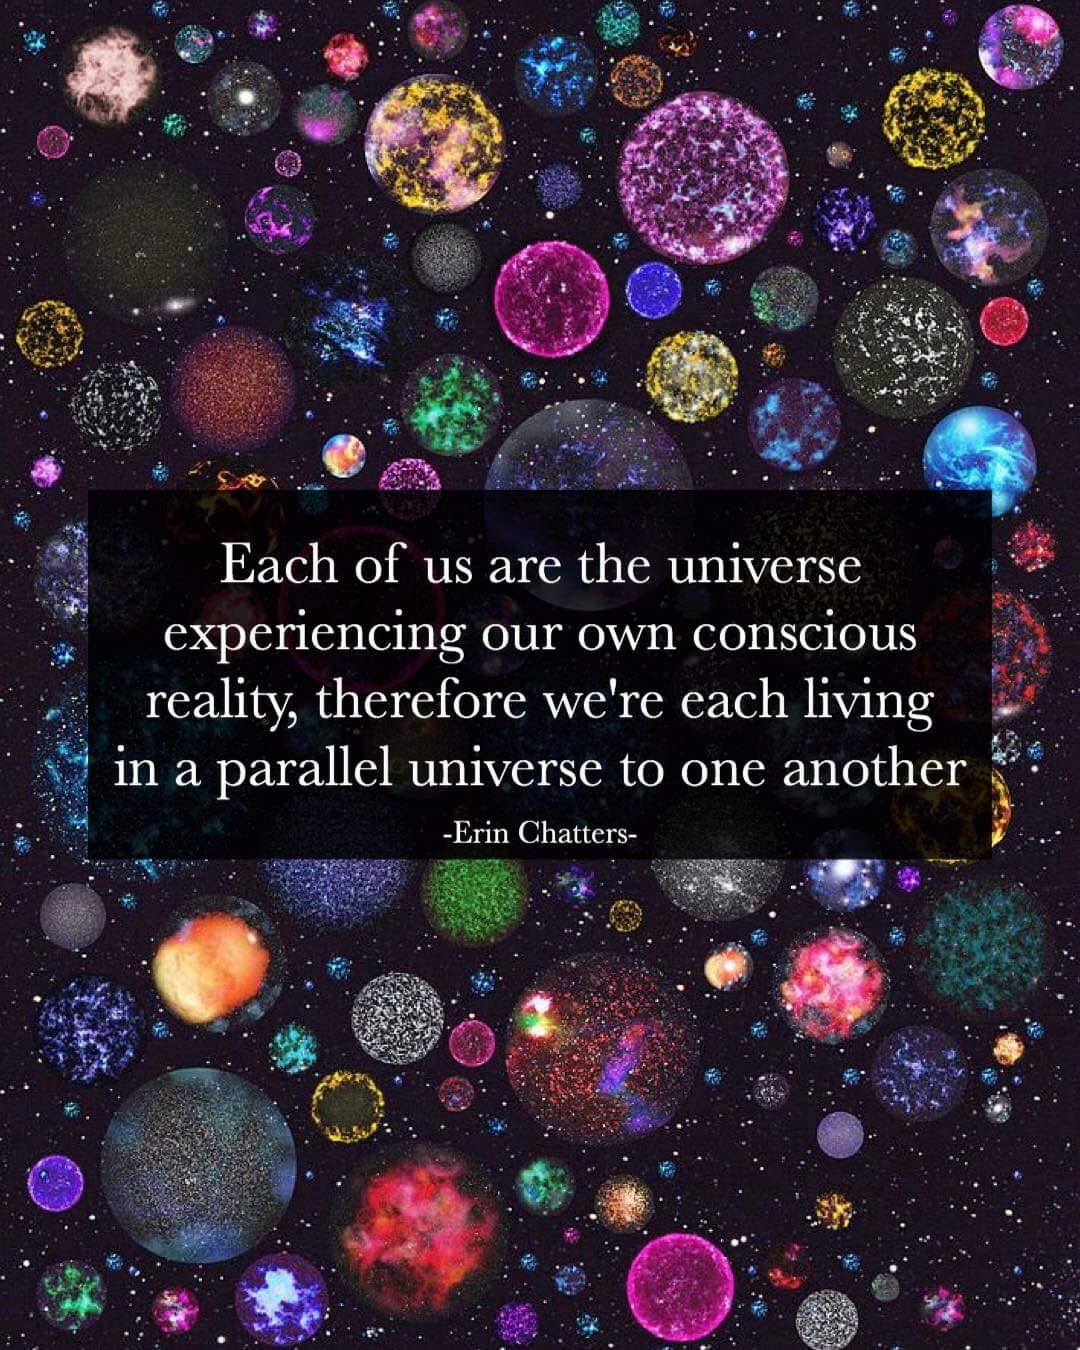 each of us are the universe experiencing our own conscious reality, therefor we're each living in a parallel universe to one another, erin chatters